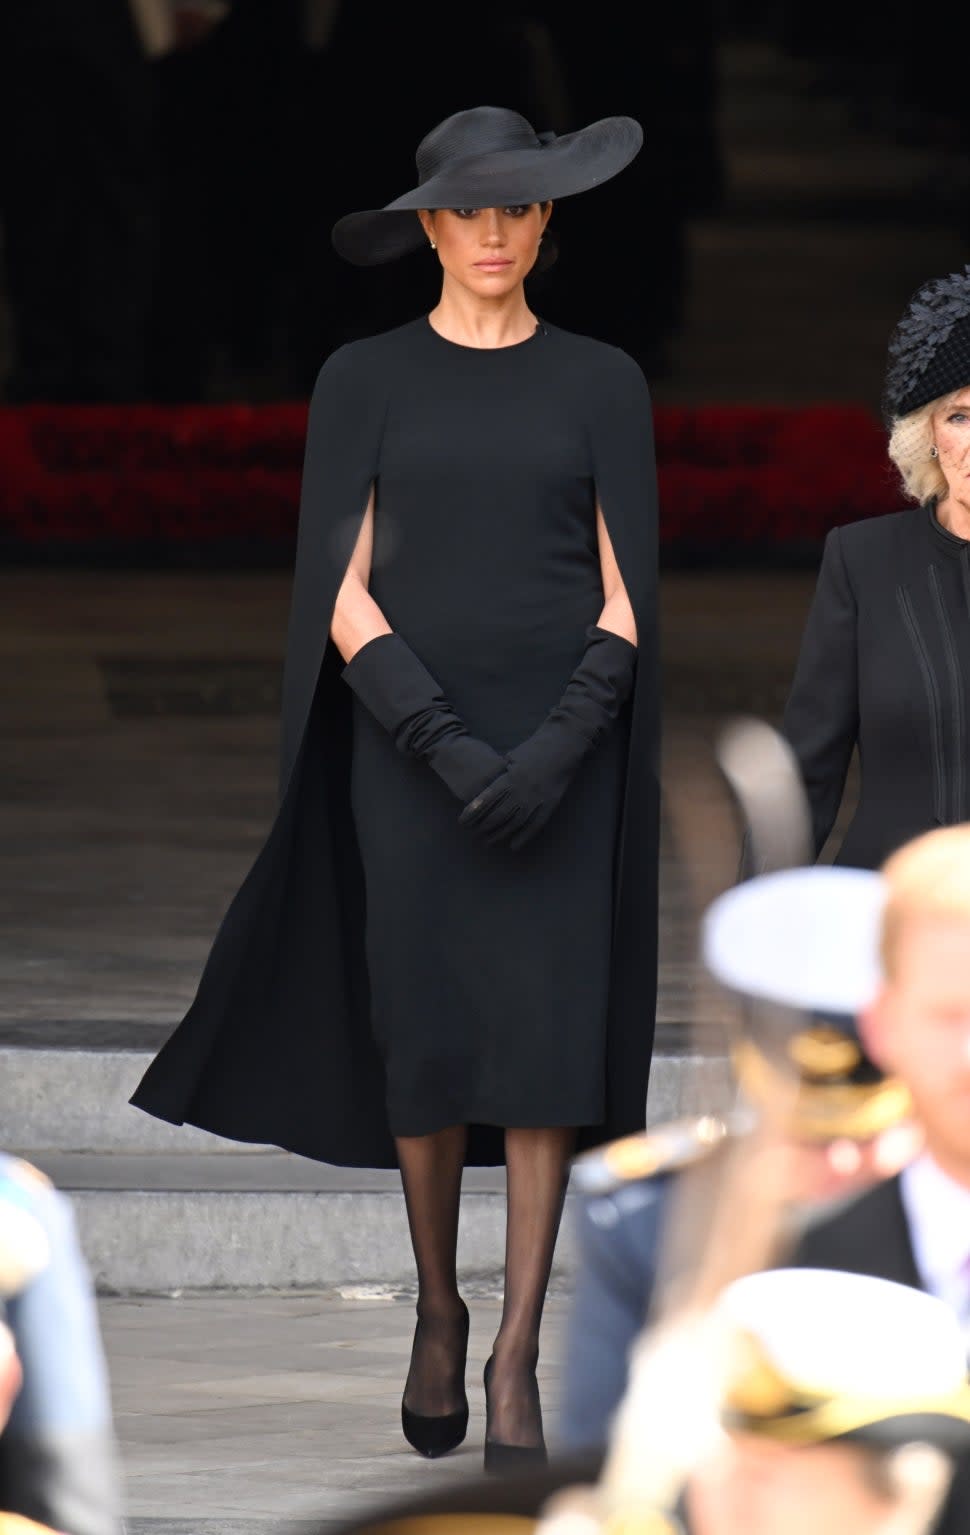 Meghan, Duchess of Sussex during the State Funeral of Queen Elizabeth II at Westminster Abbey on September 19, 2022 in London, England.